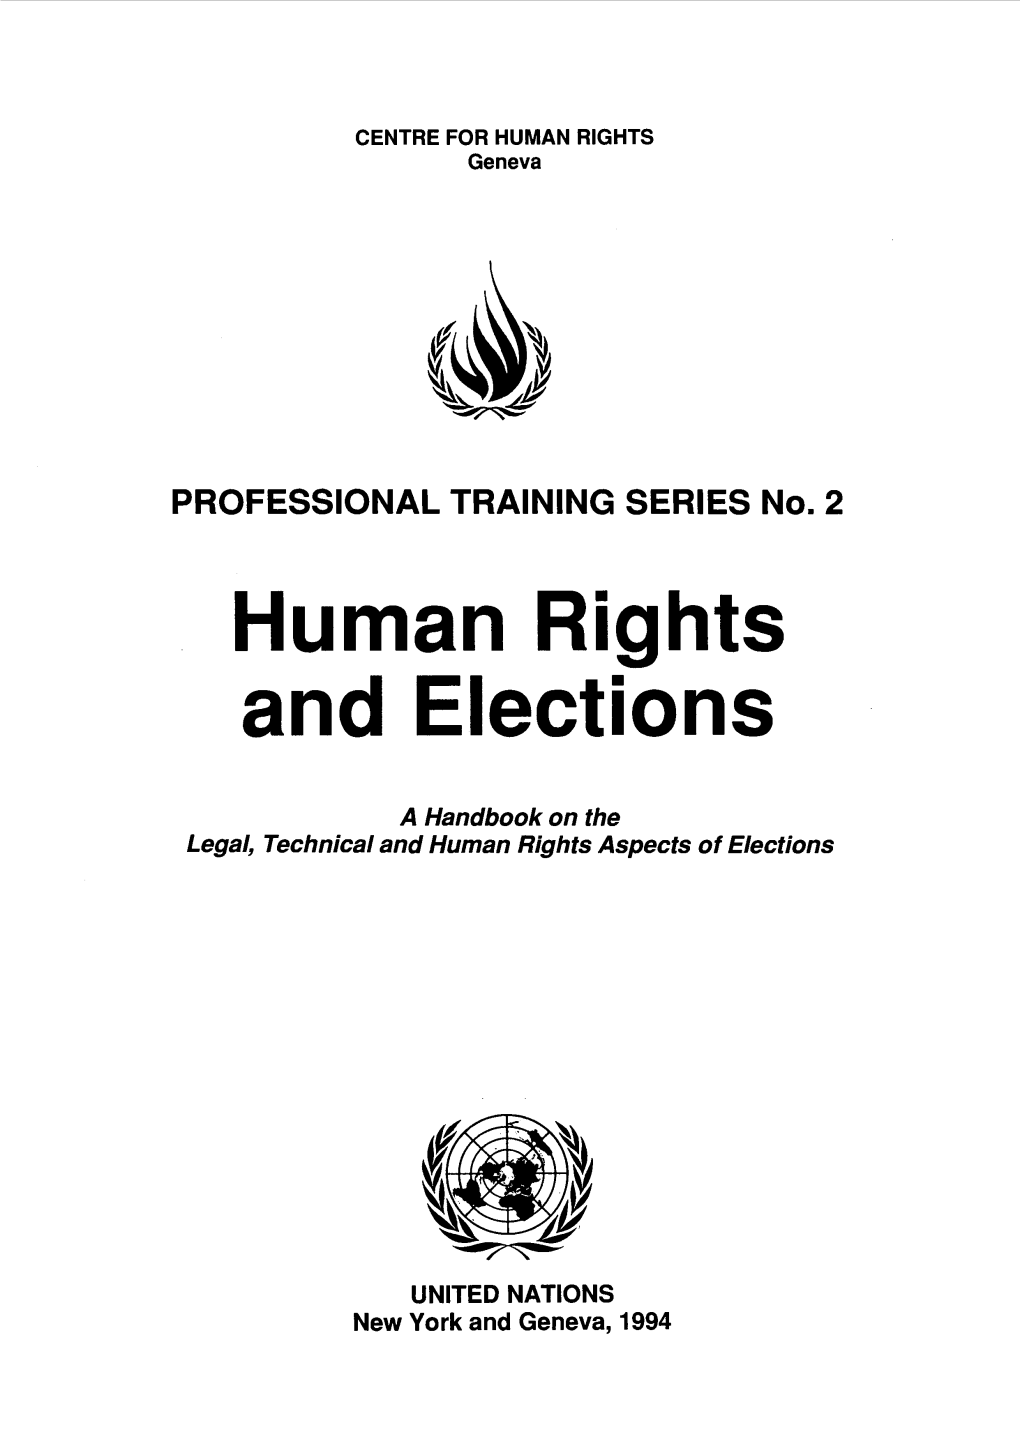 Human Rights and Elections